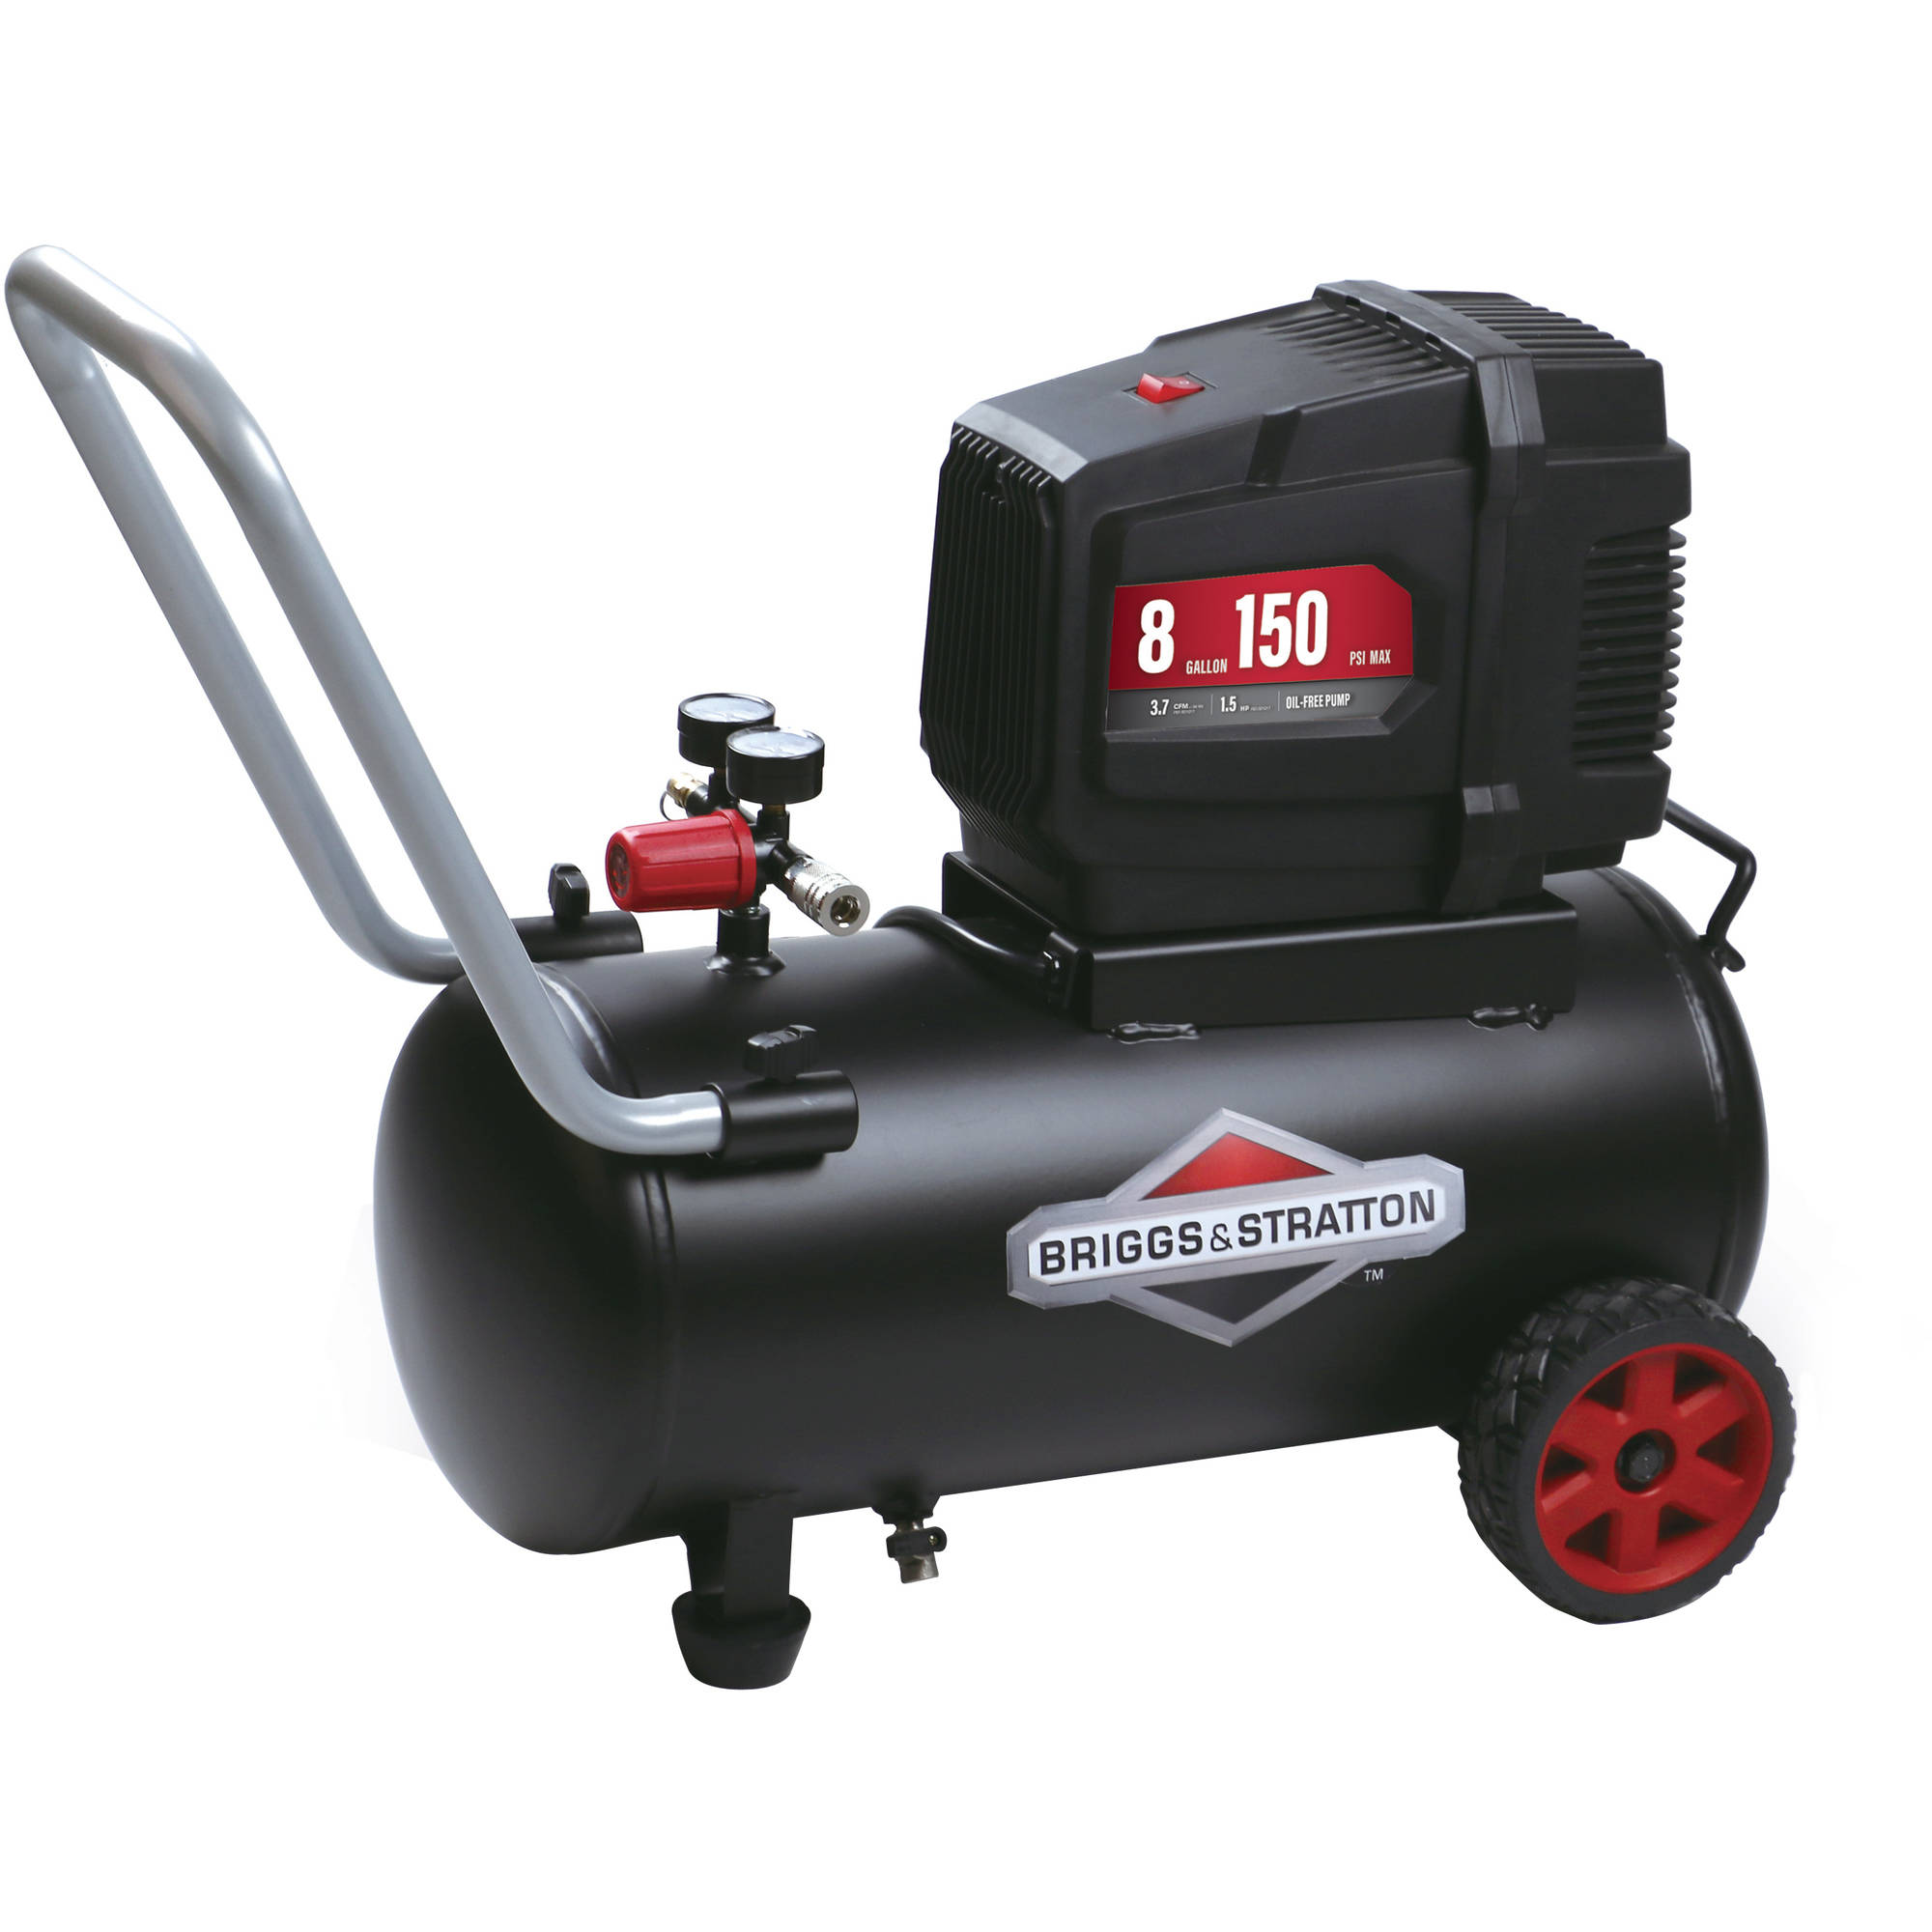 Briggs and Stratton Air pressor $64 with store pick up